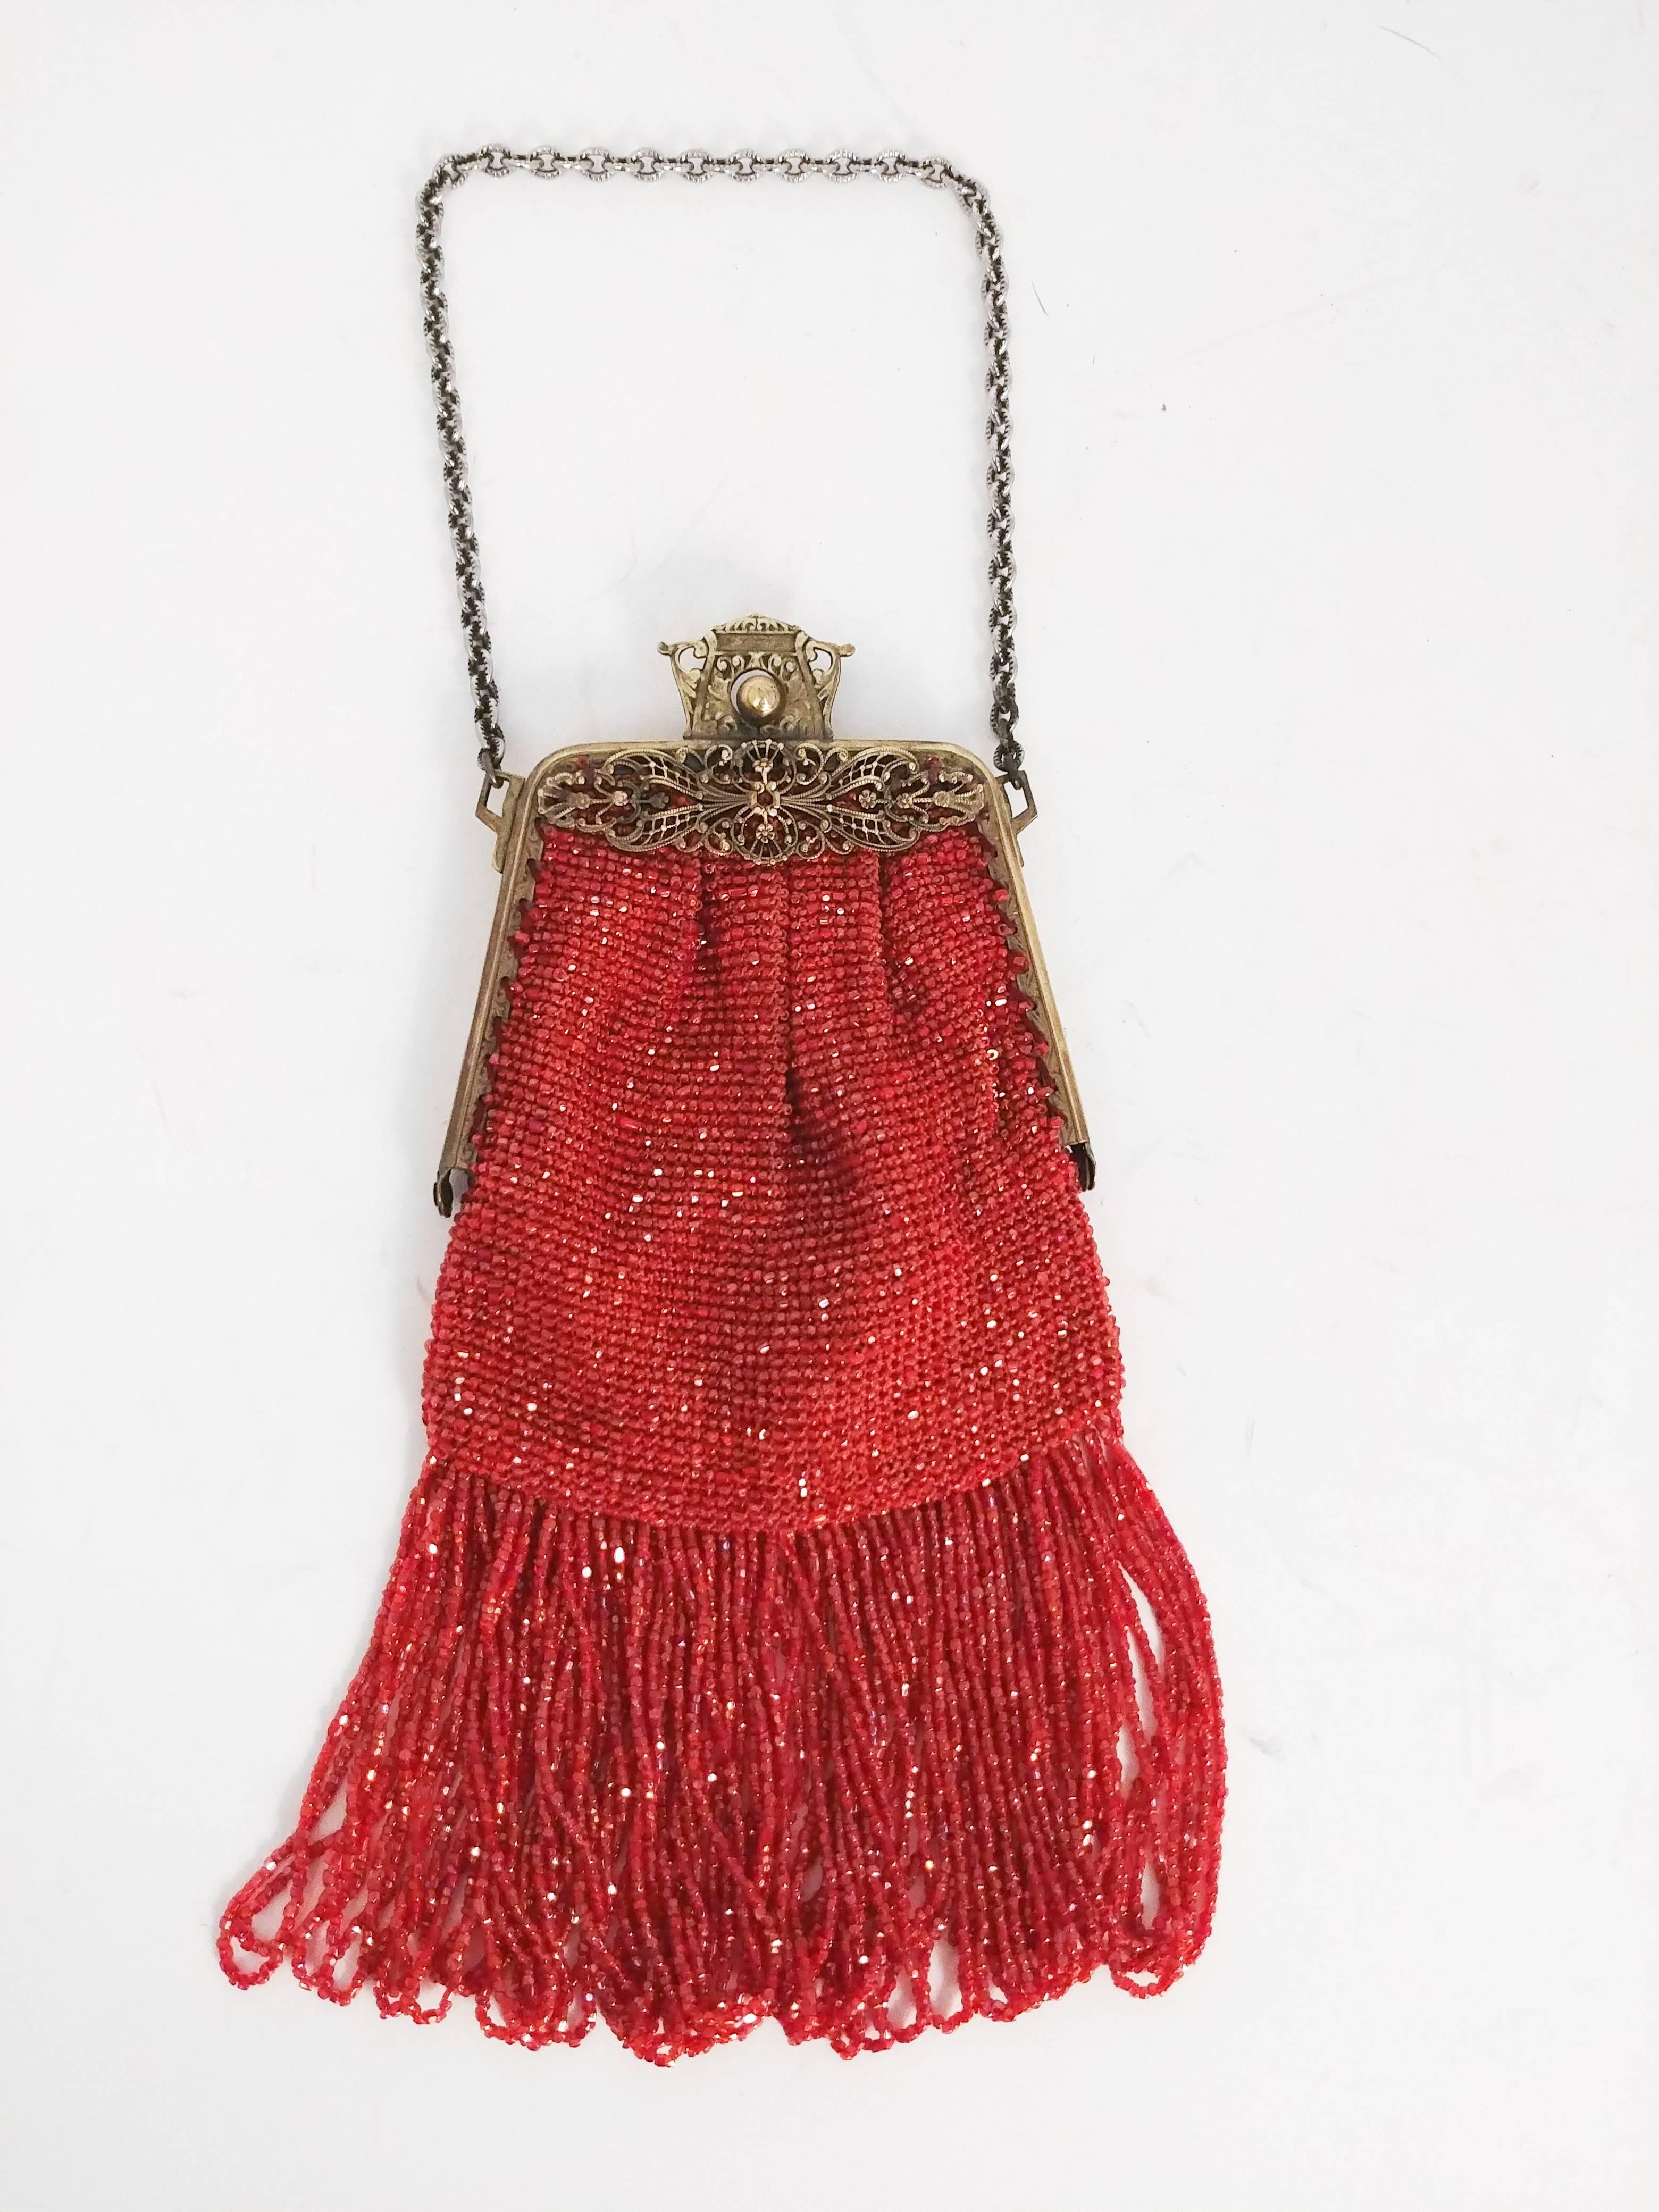 1920s Blood Orange Glass Bead Fringe Purse. Intricate filigree clasp and frame, chain link handle. Looped glass bead fringe trim. Brightly printed floral lining adds surprise pop of color. 